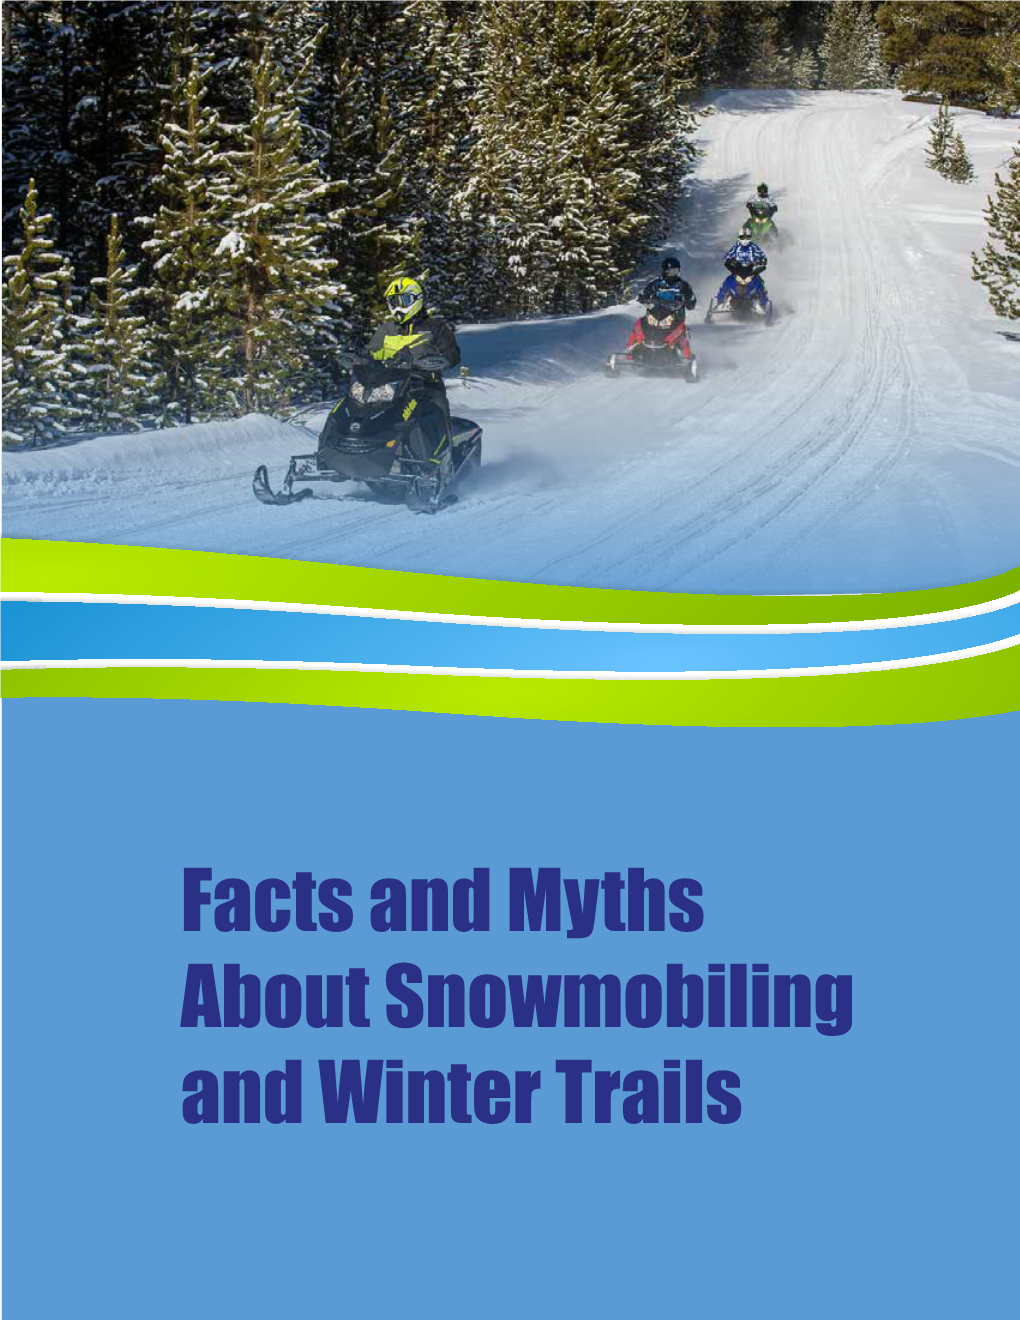 Facts and Myths About Snowmobiling and Winter Trails